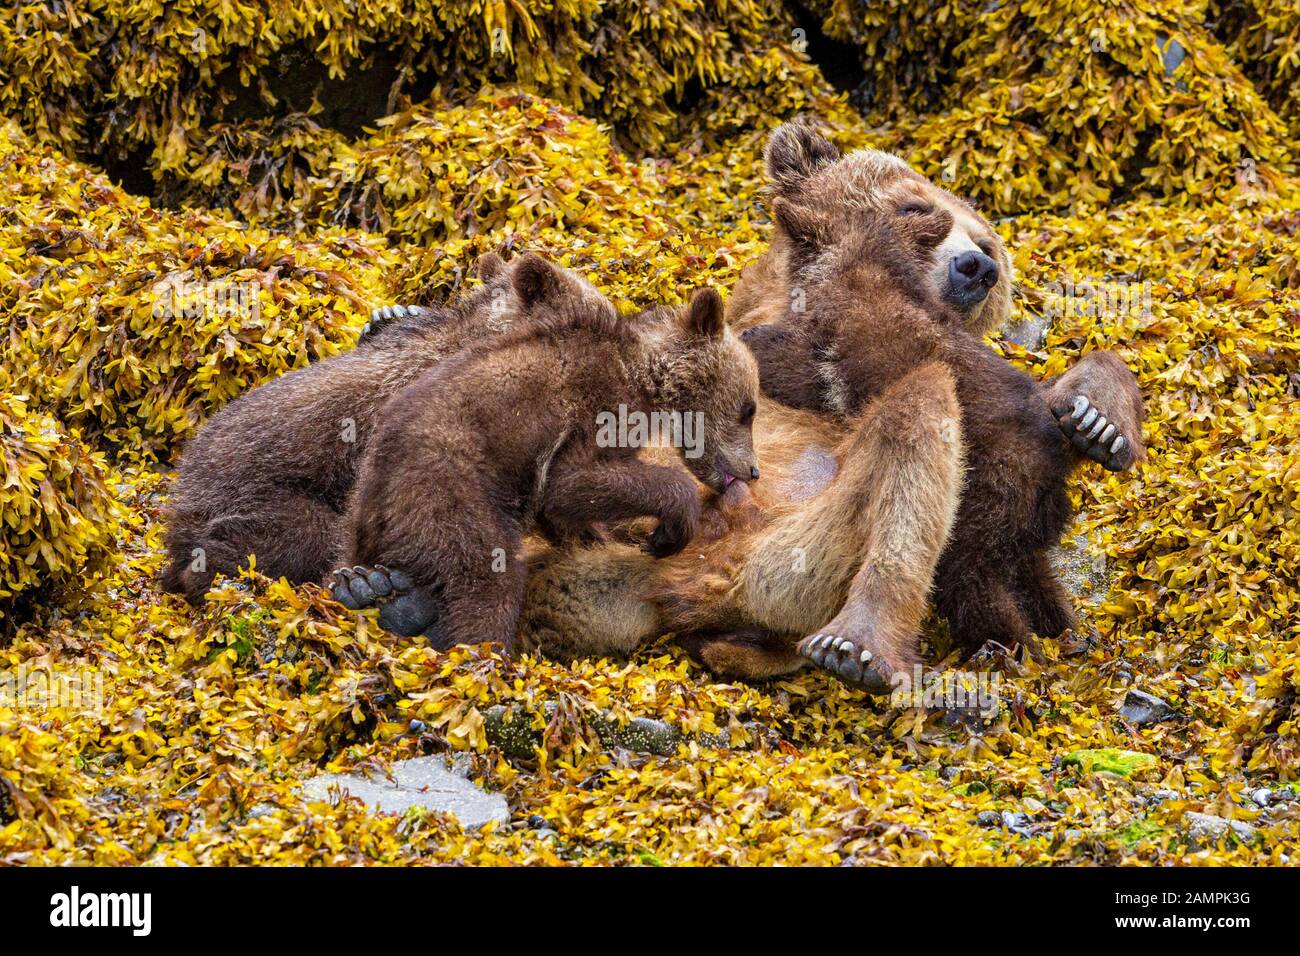 Grizzly Bear Mama, die ihre Jungtiere bei Ebbe in Seetang entlang des Knight Inlet Shore, First Nations Territory, British Columbia, Kanada stillt. Stockfoto